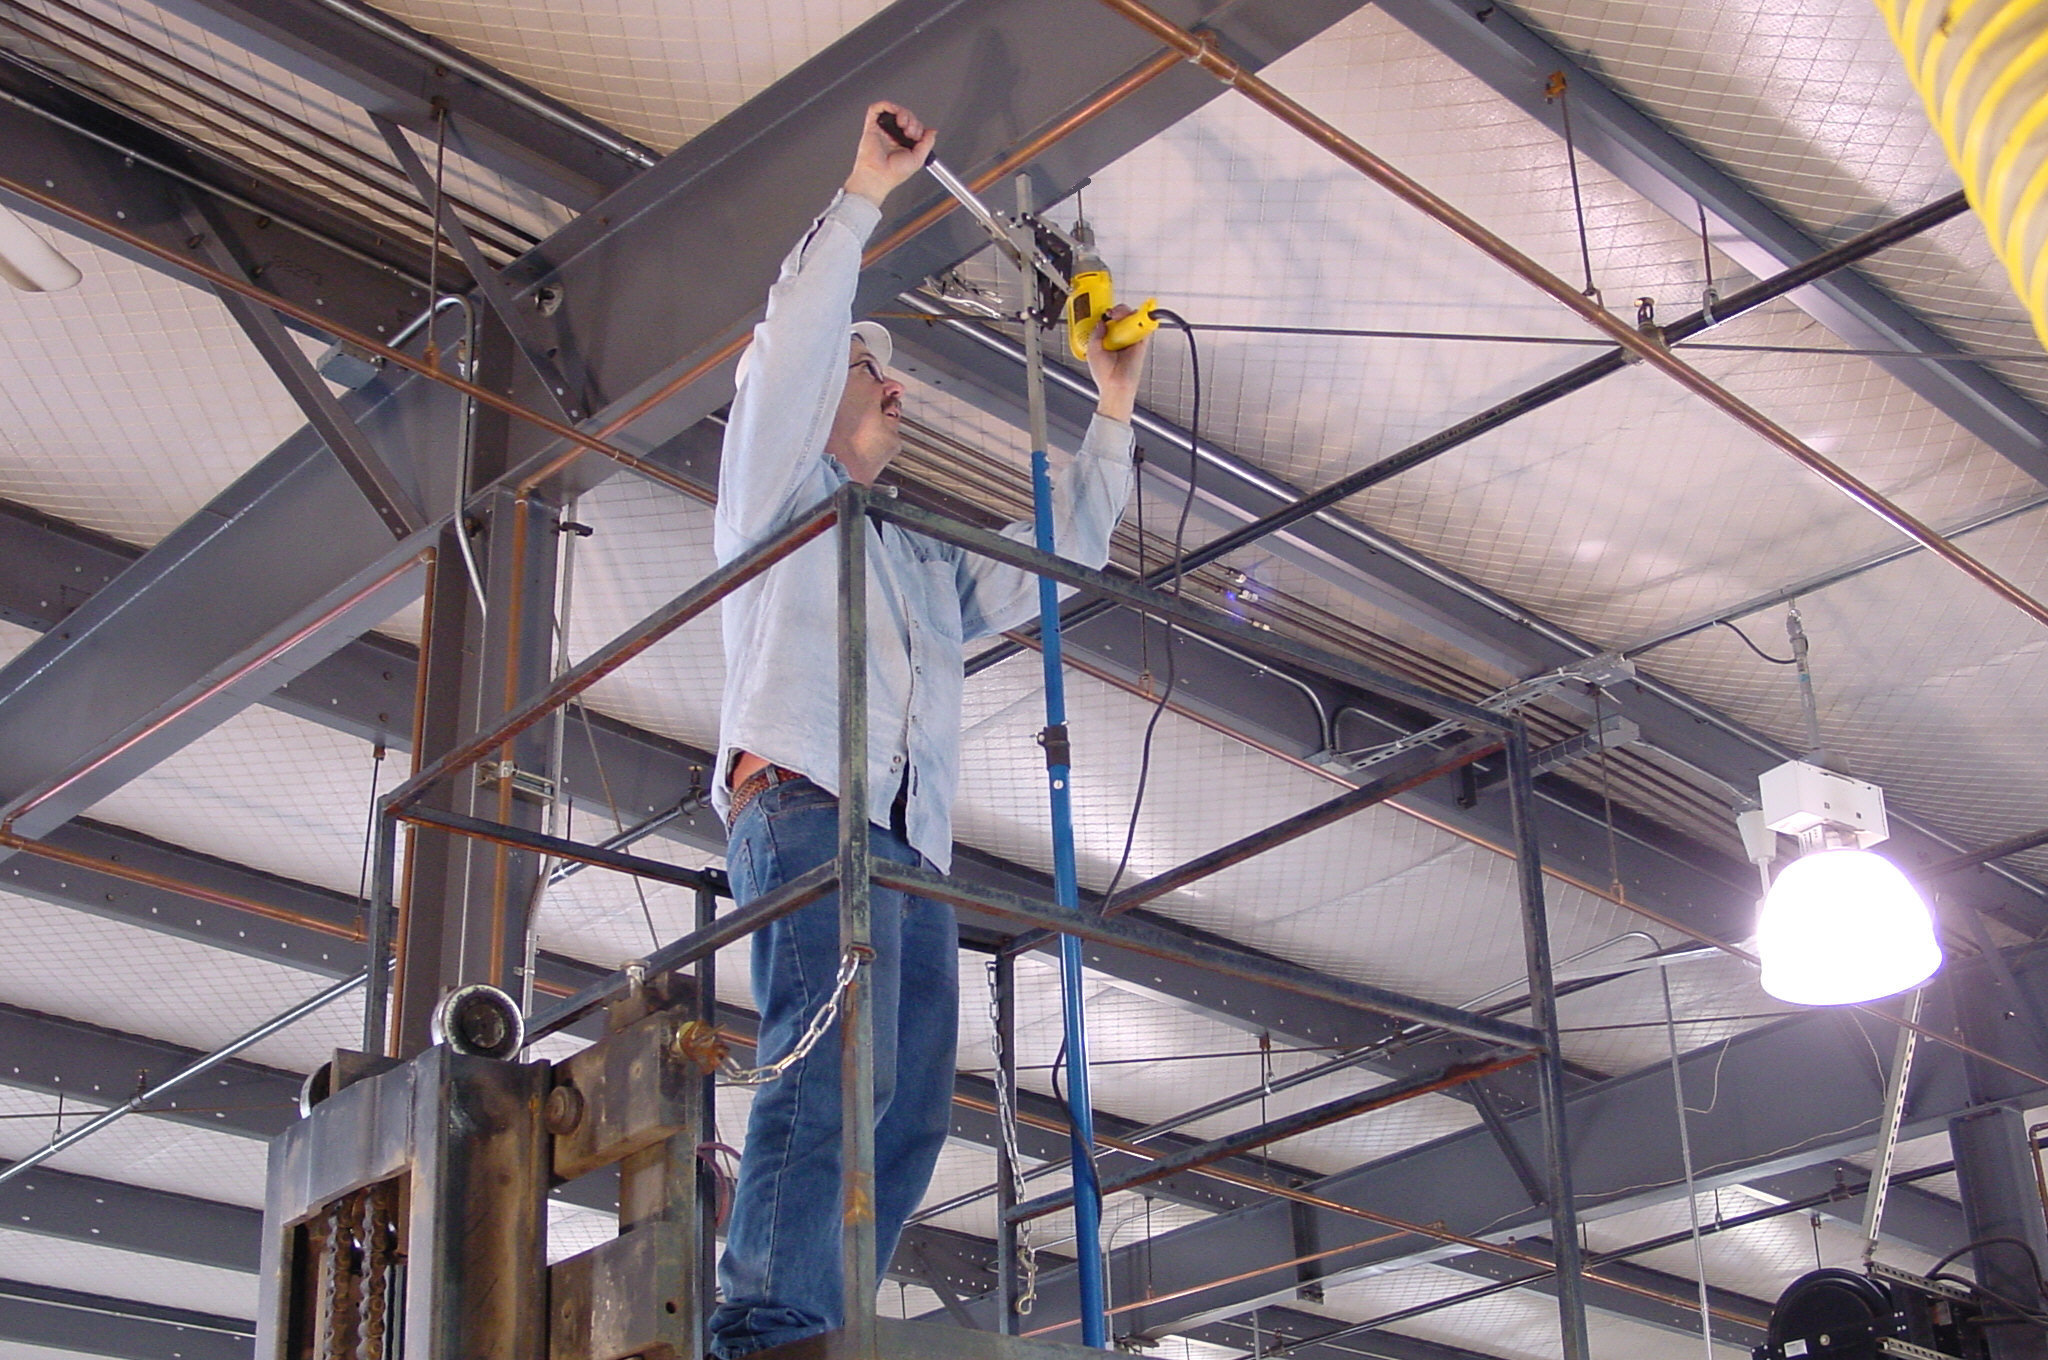 Overhead Drilling Overhead drilling into a steel beam while standing on a lift